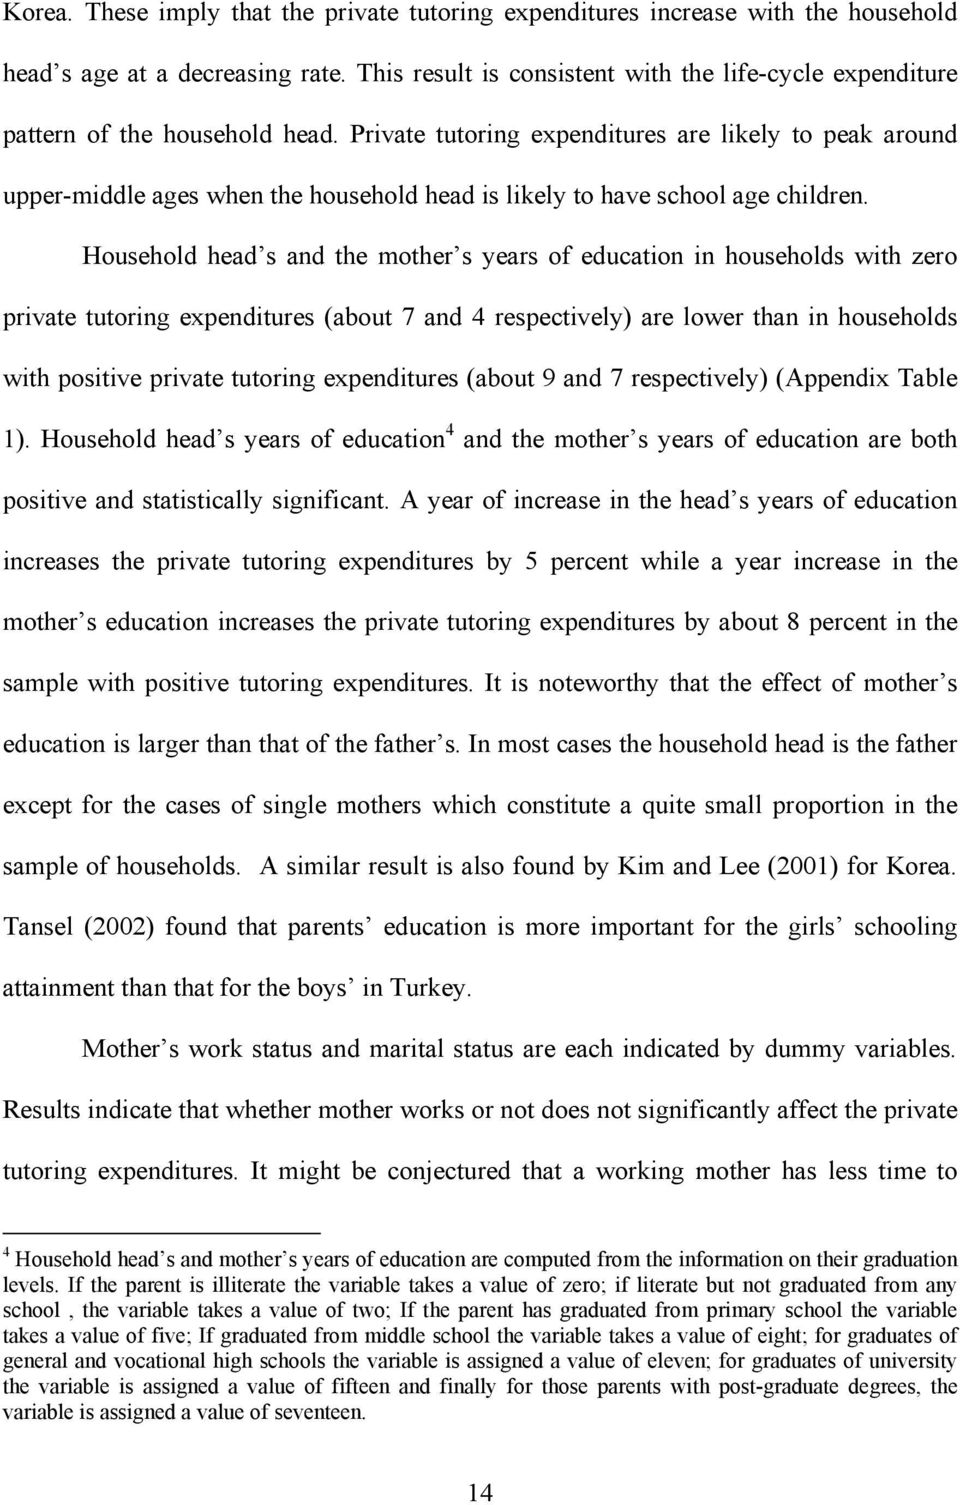 Private tutoring expenditures are likely to peak around upper-middle ages when the household head is likely to have school age children.